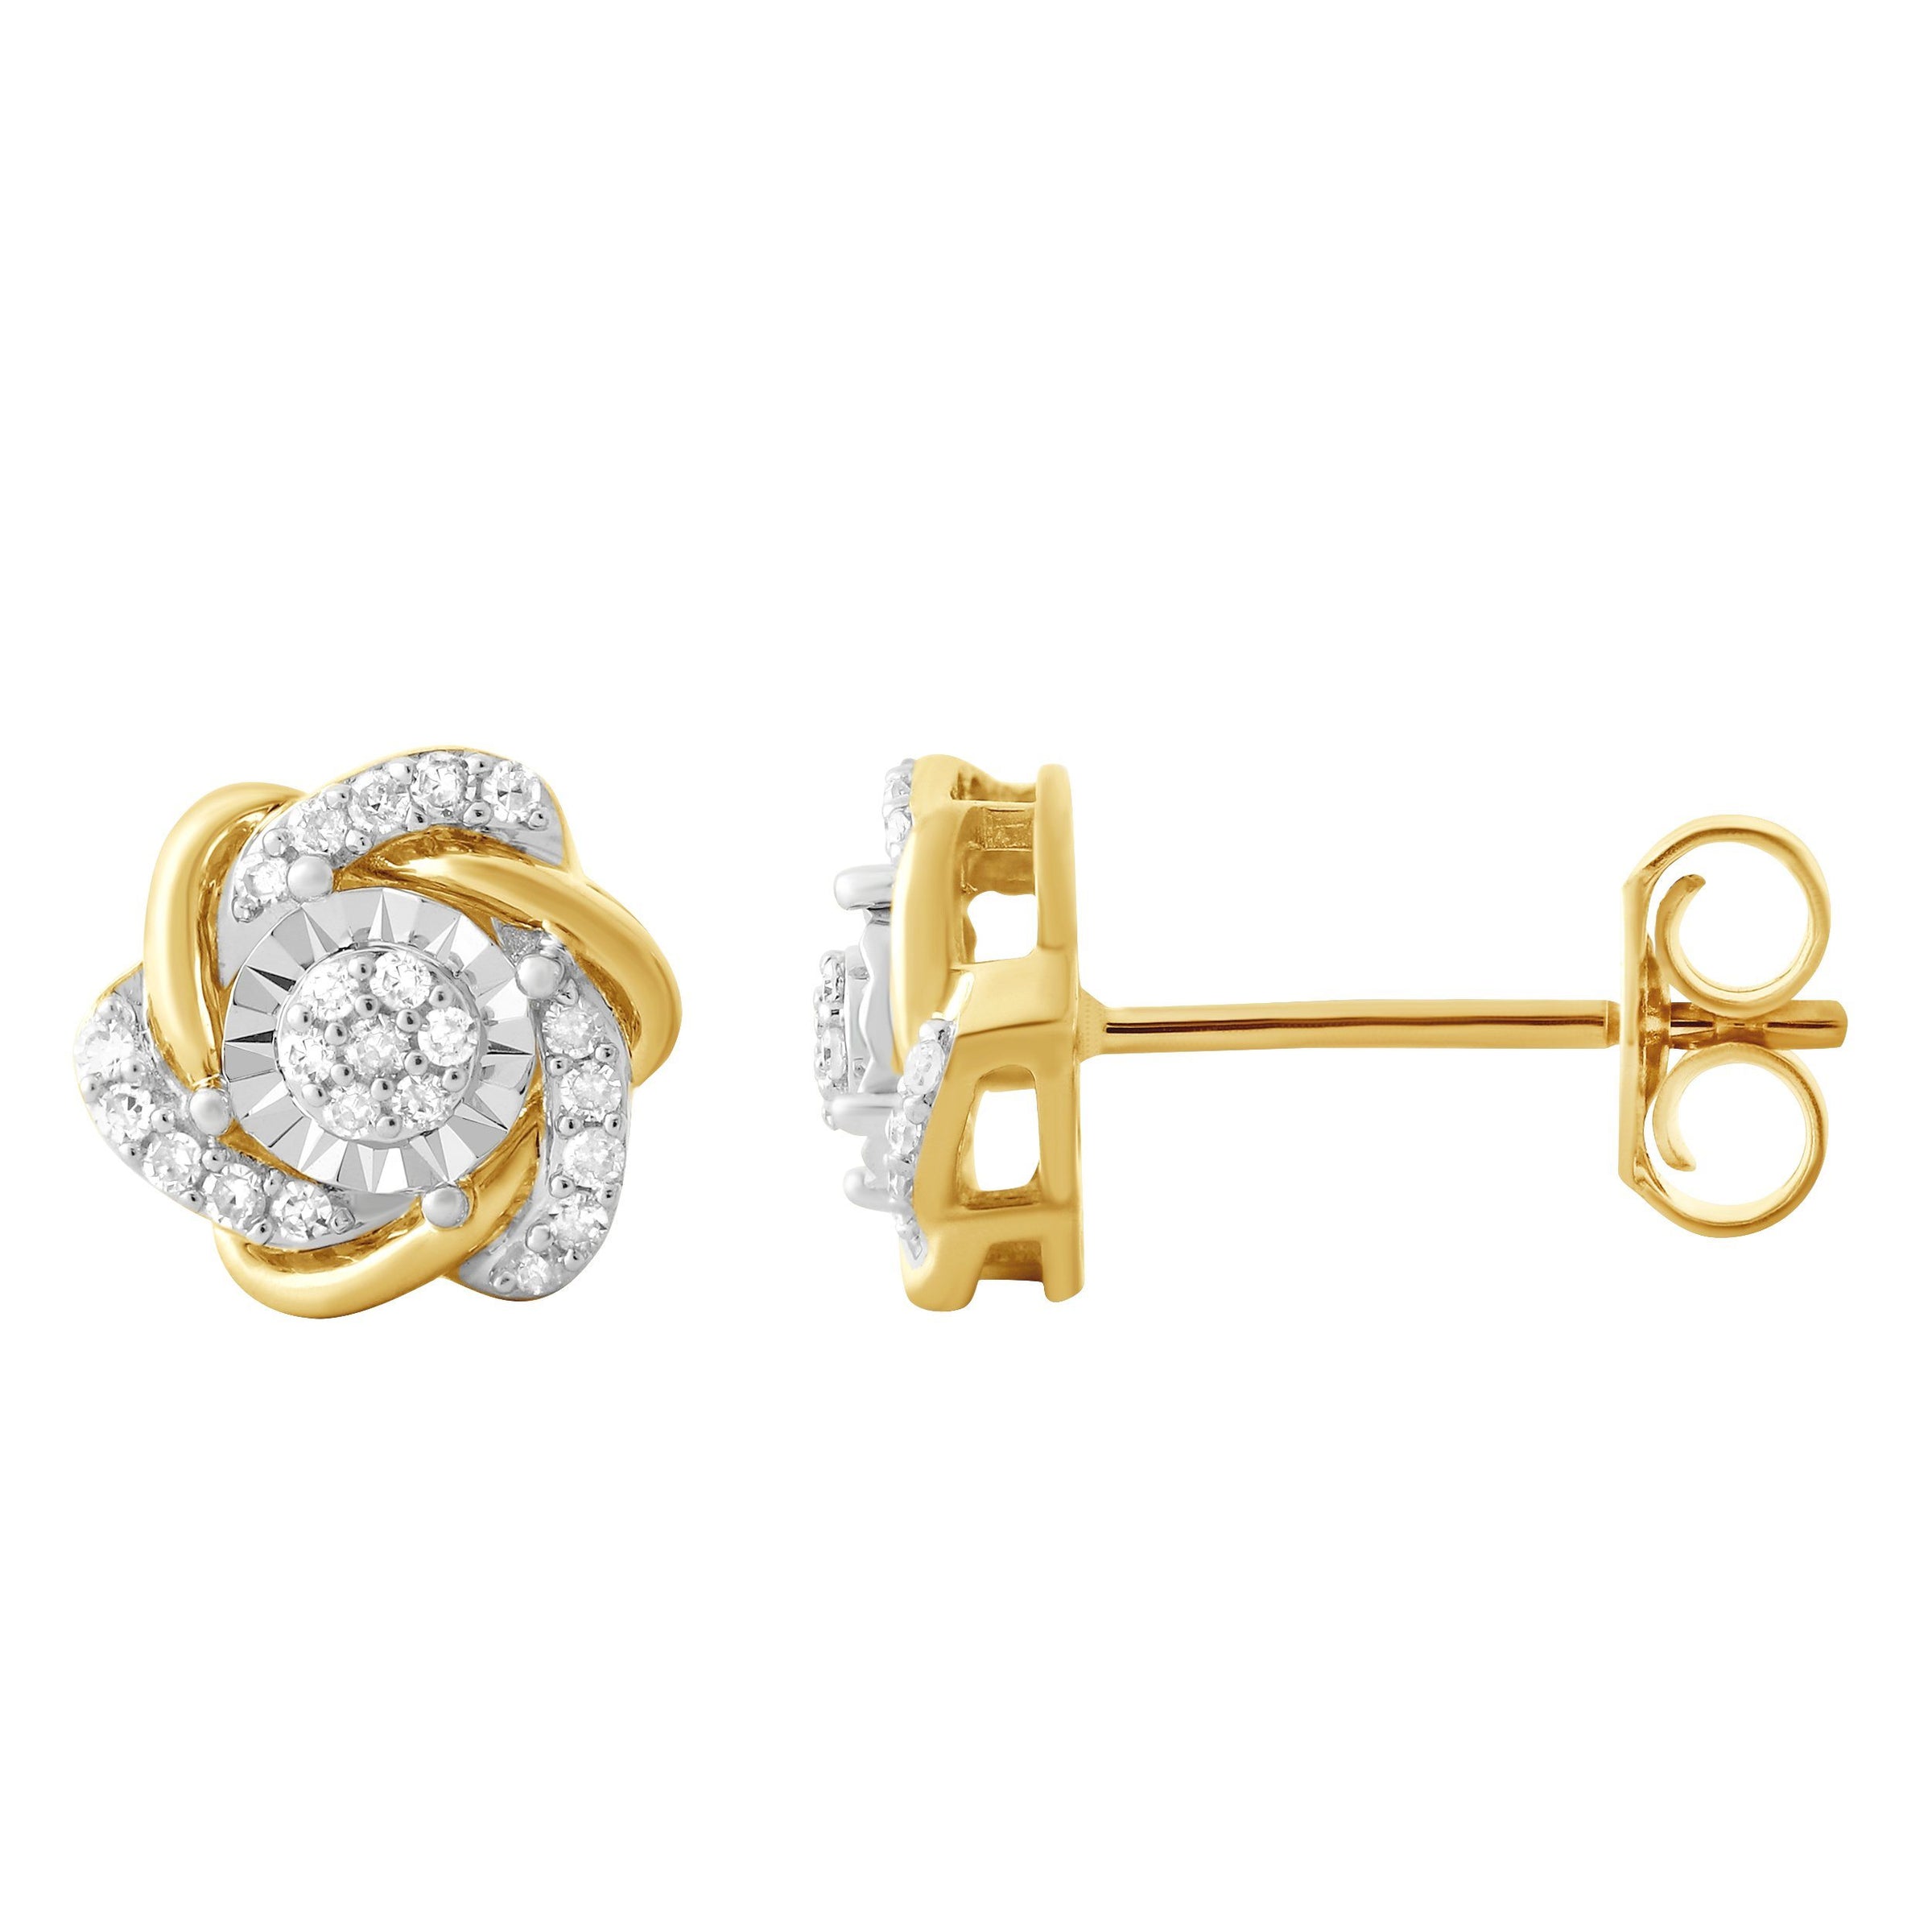 Flower Halo Stud Earrings with 0.10ct of Diamonds in 9ct Yellow Gold Earrings Bevilles 